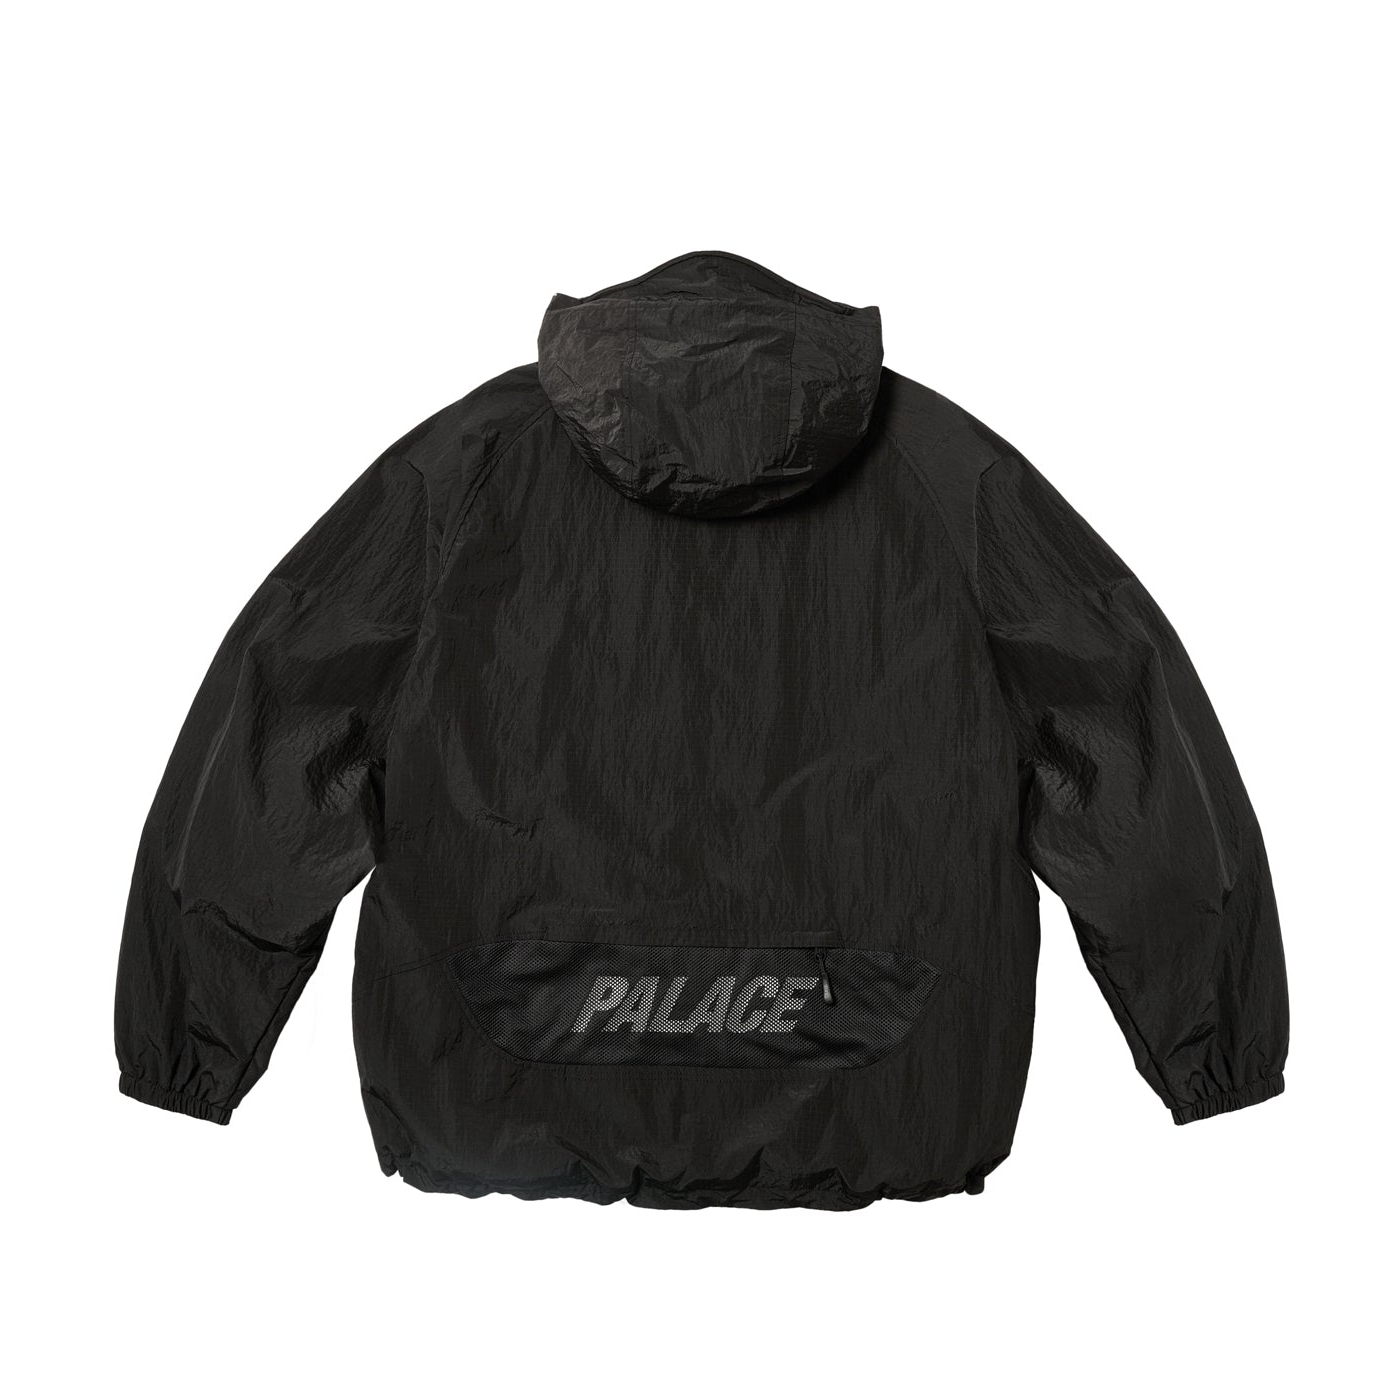 Thumbnail Y-RIPSTOP SHELL JACKET BLACK one color